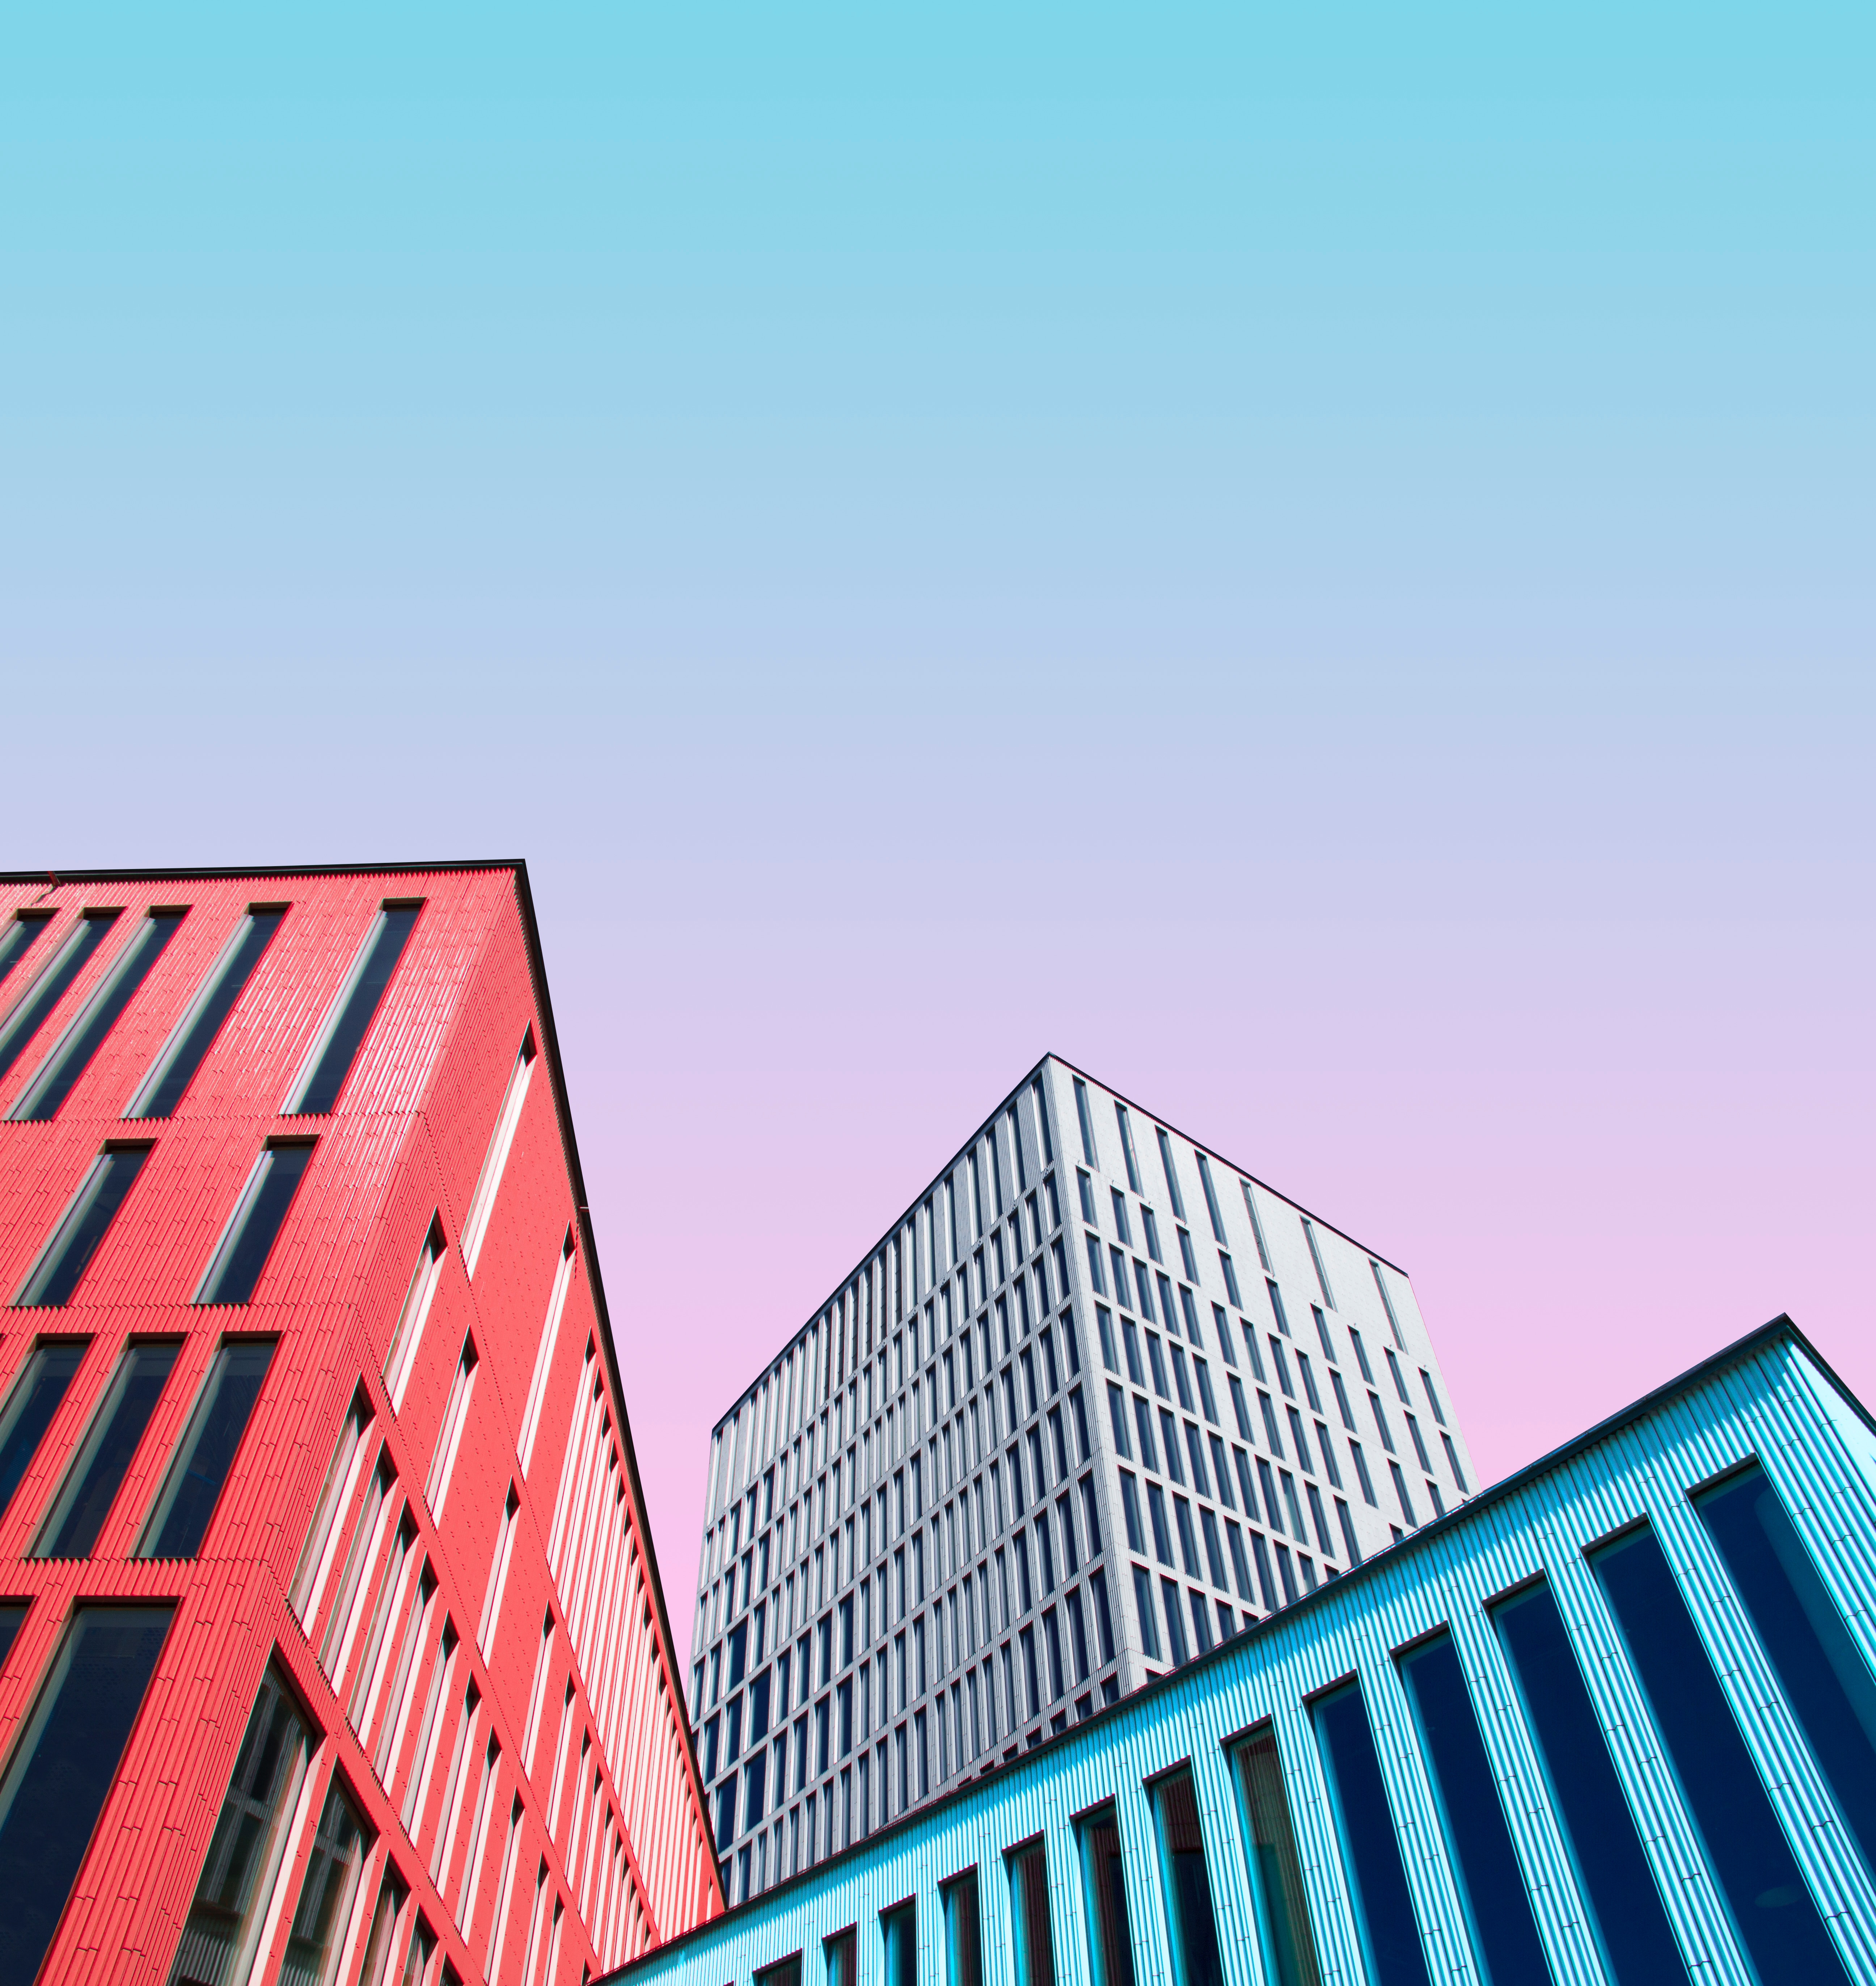 minimalism, multicolored, architecture, building, motley, symmetry wallpaper for mobile